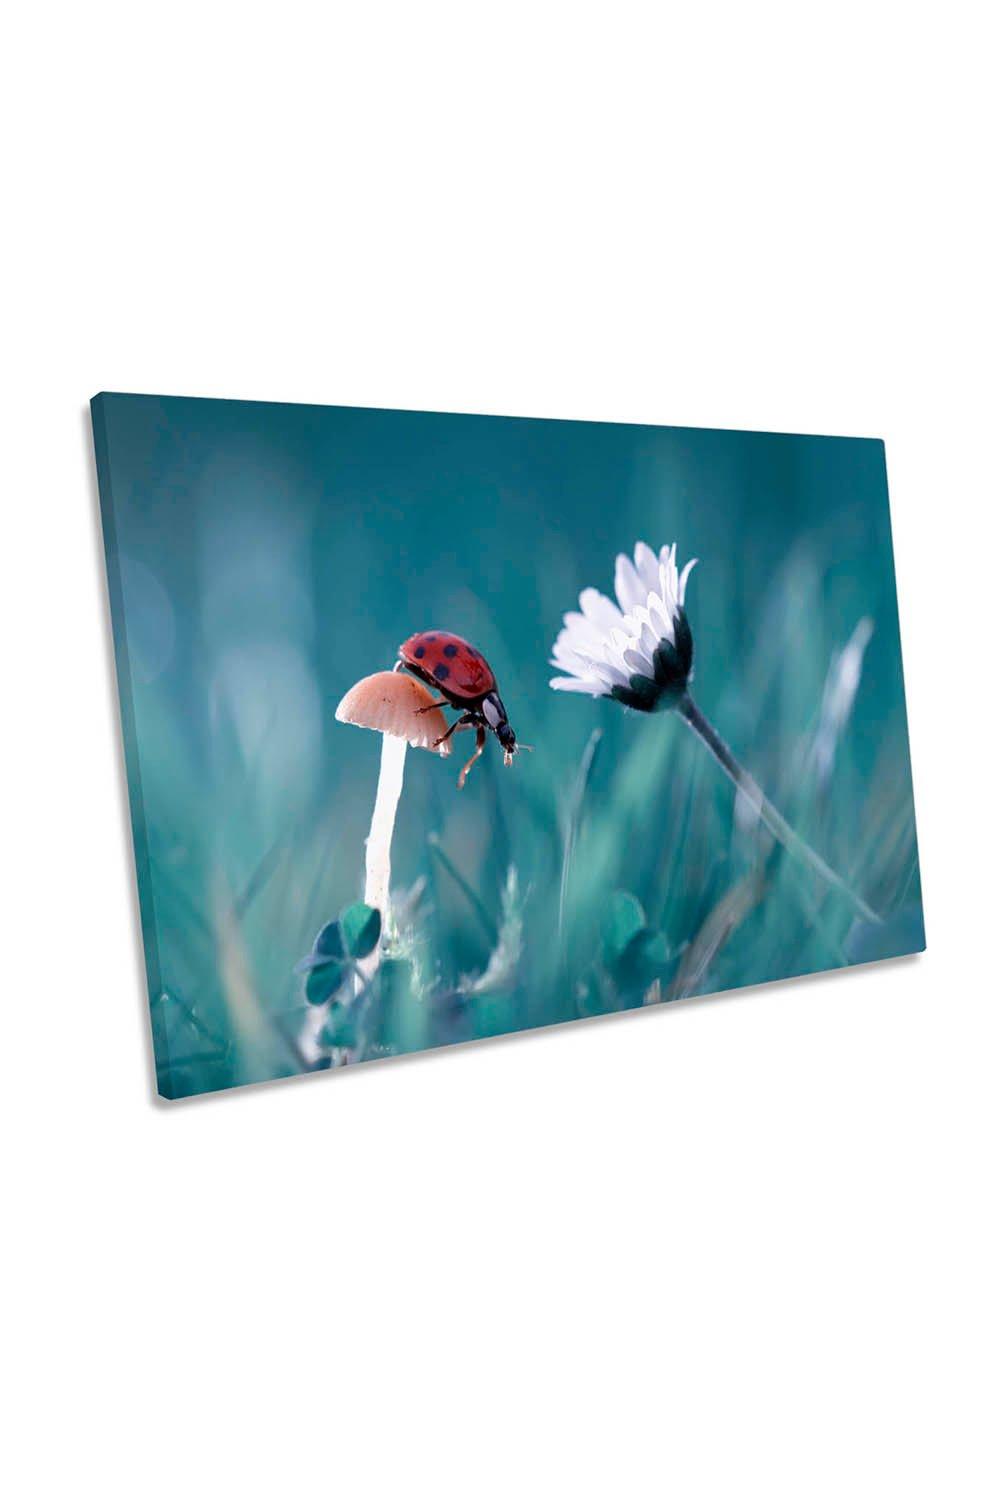 Ladybird Floral Flower Turquoise Canvas Wall Art Picture Print